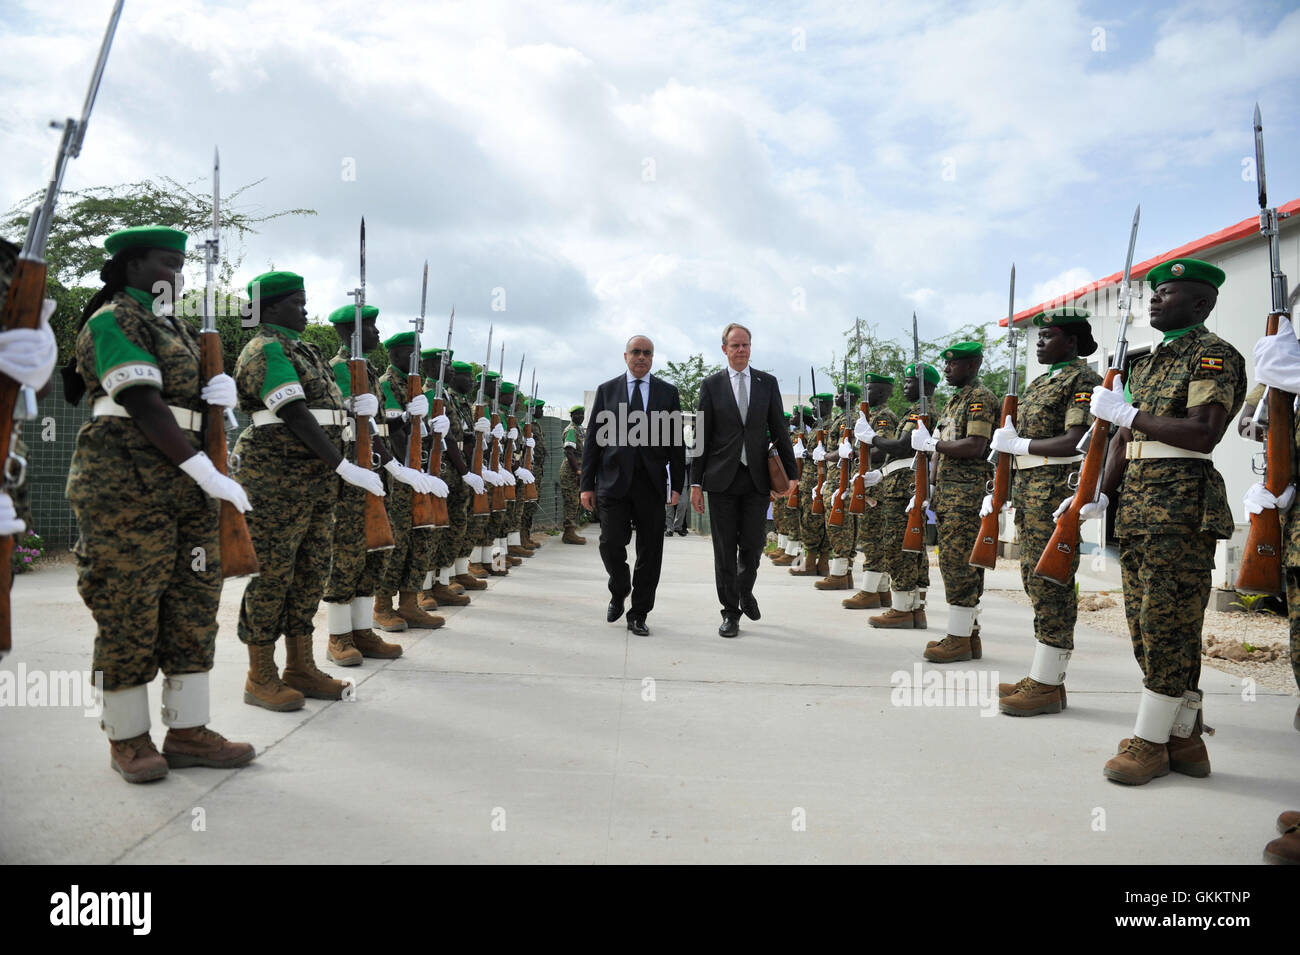 Members of the United Nations Security Council march through a guard of honour mounted y AU troops during their arrival in  Mogadishu, Somalia, on 19 May, 2016. They were received at Aden Abdulle International Airport by senior UN, AU and   Federal Government of Somalia officials. AMISOM Photo / Omar Abdisalan Stock Photo